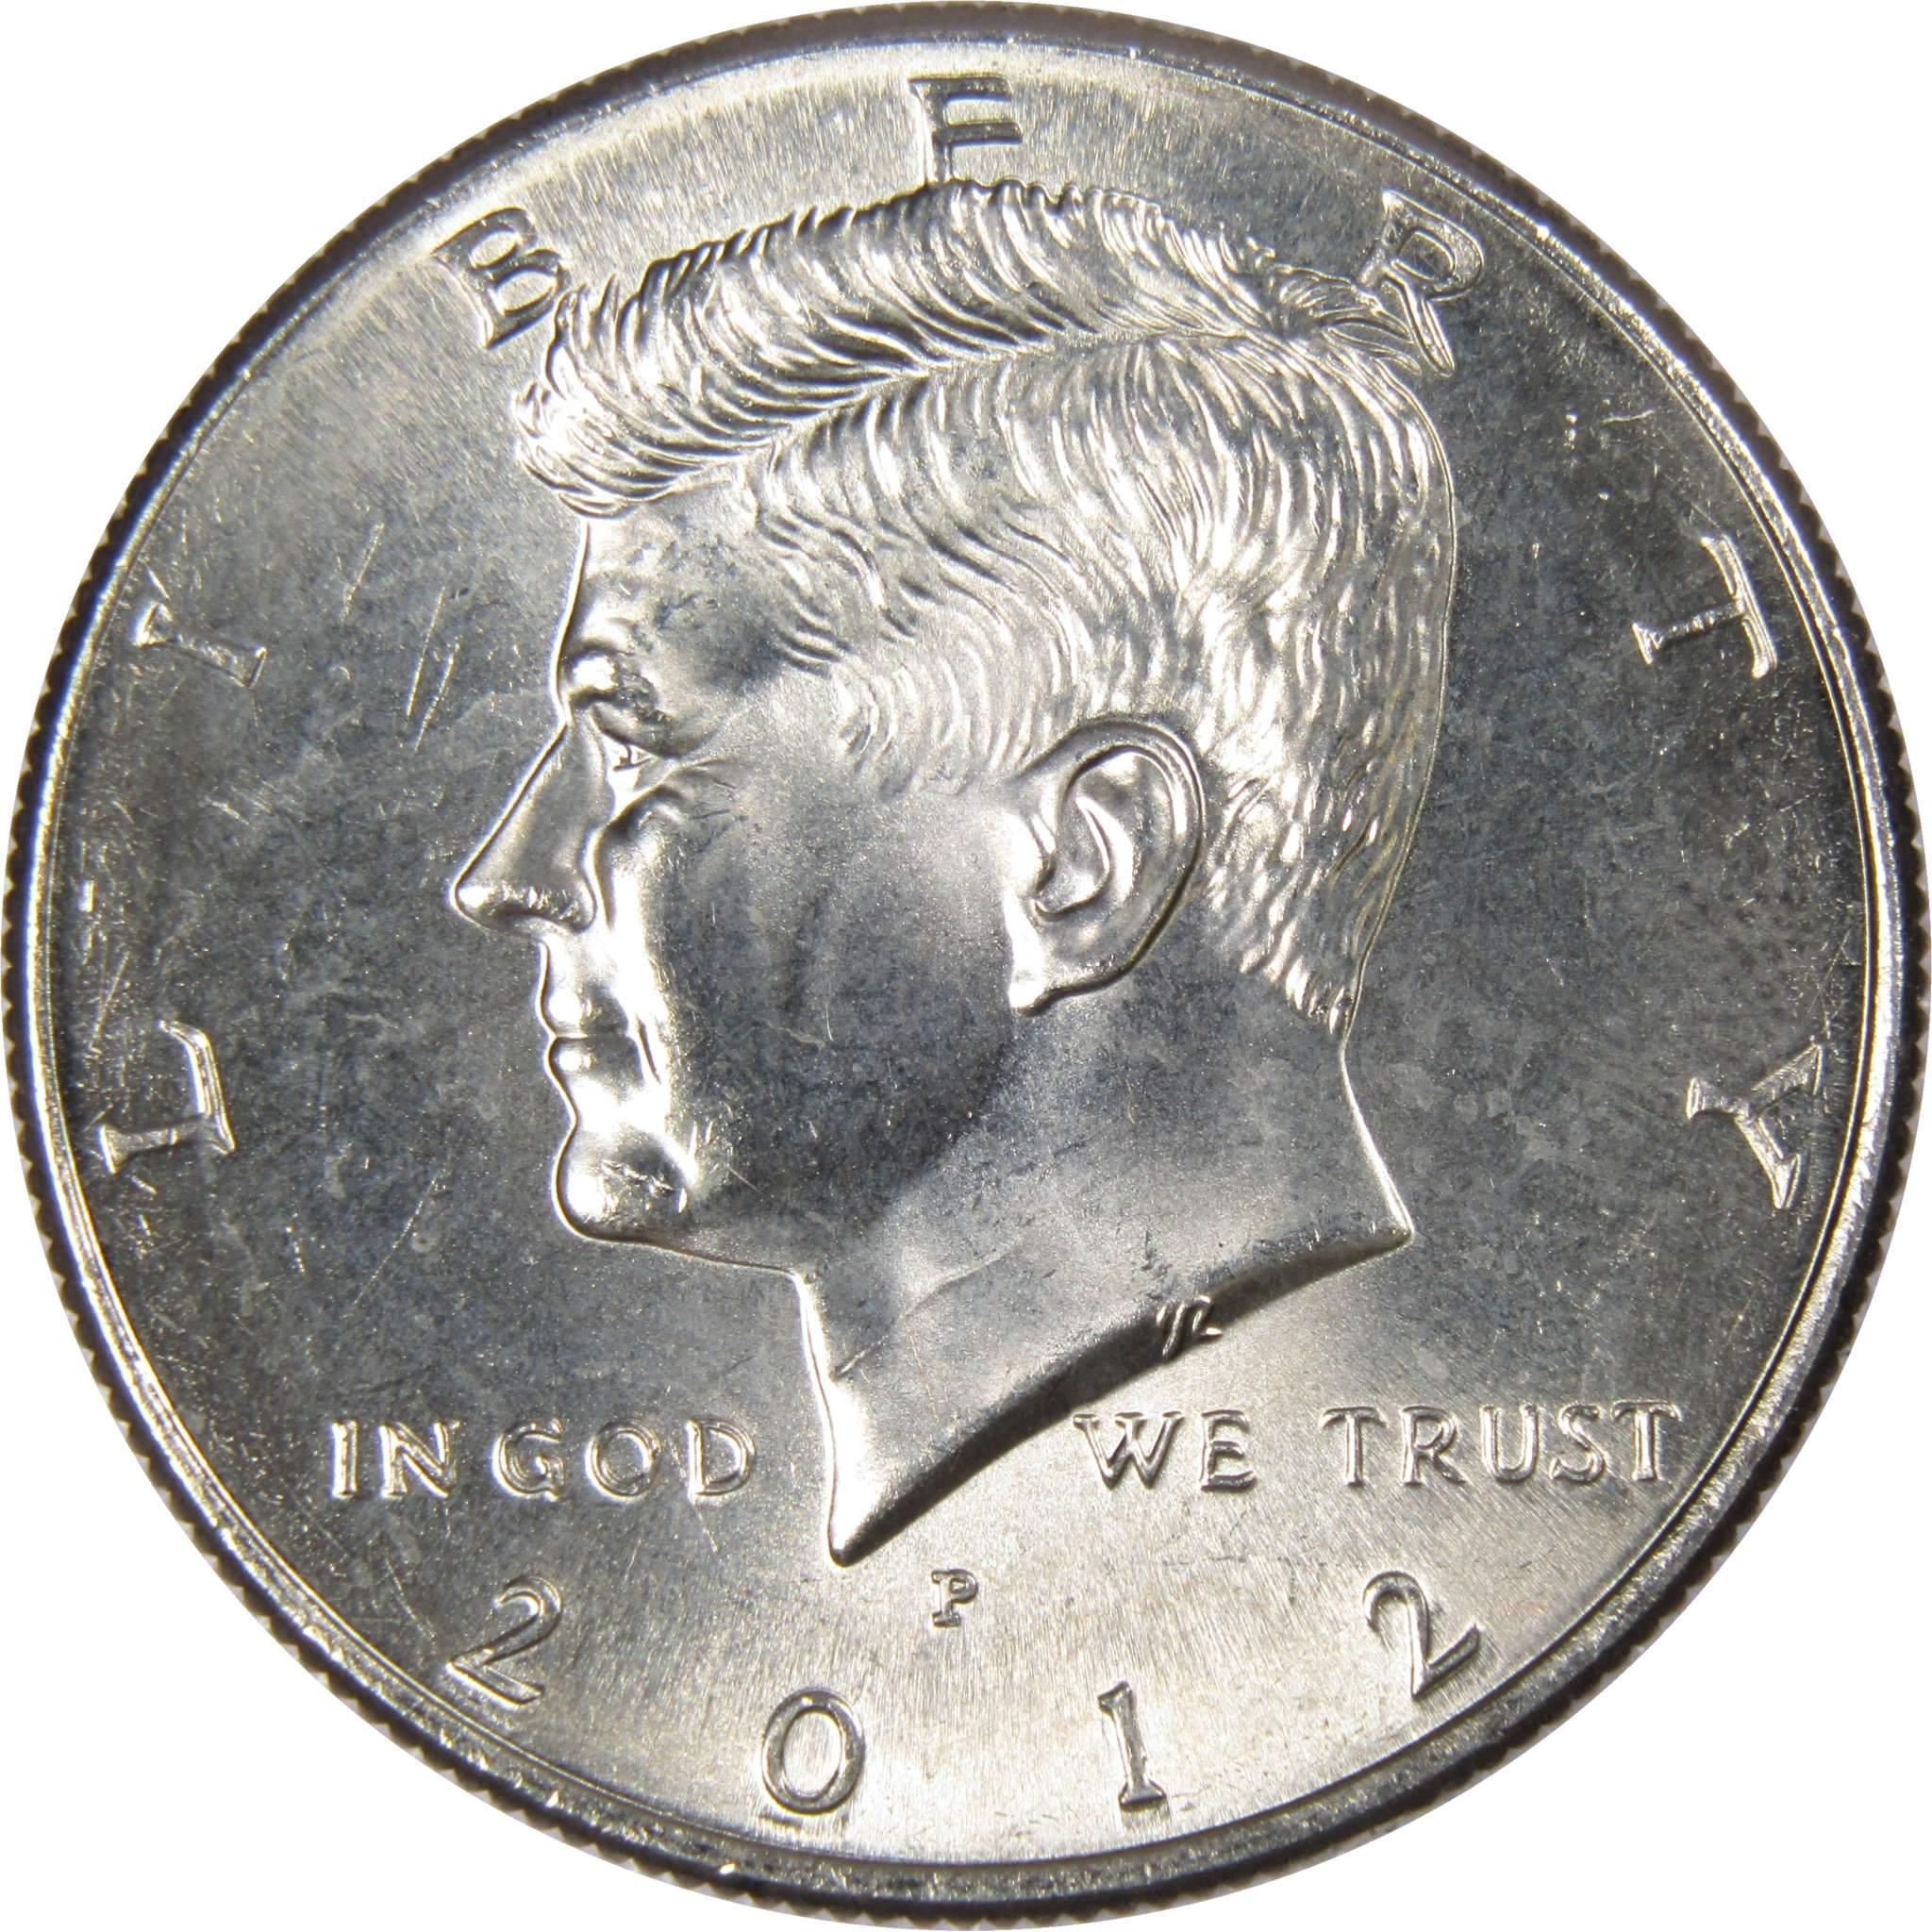 2012 P Kennedy Half Dollar BU Uncirculated Mint State 50c US Coin Collectible